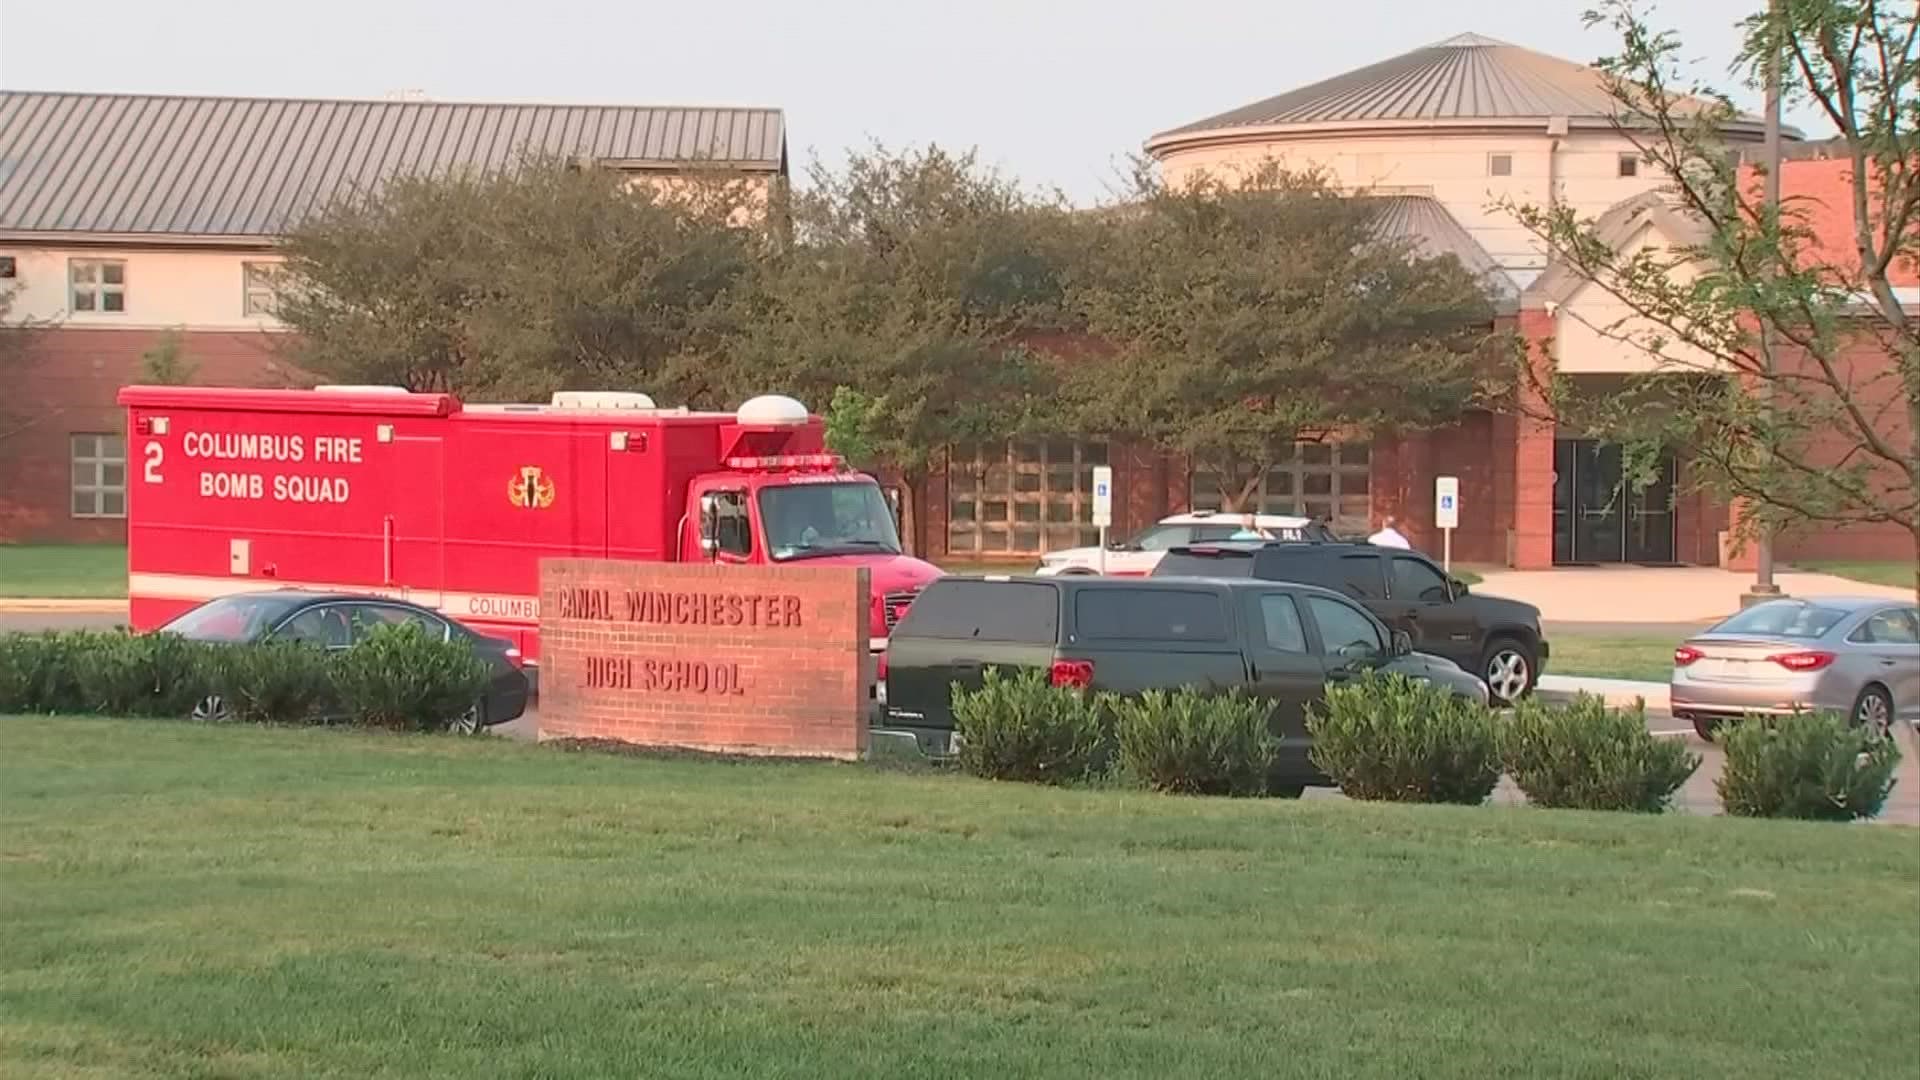 According to a district spokesperson, a shooting threat was reported at the school Tuesday morning.